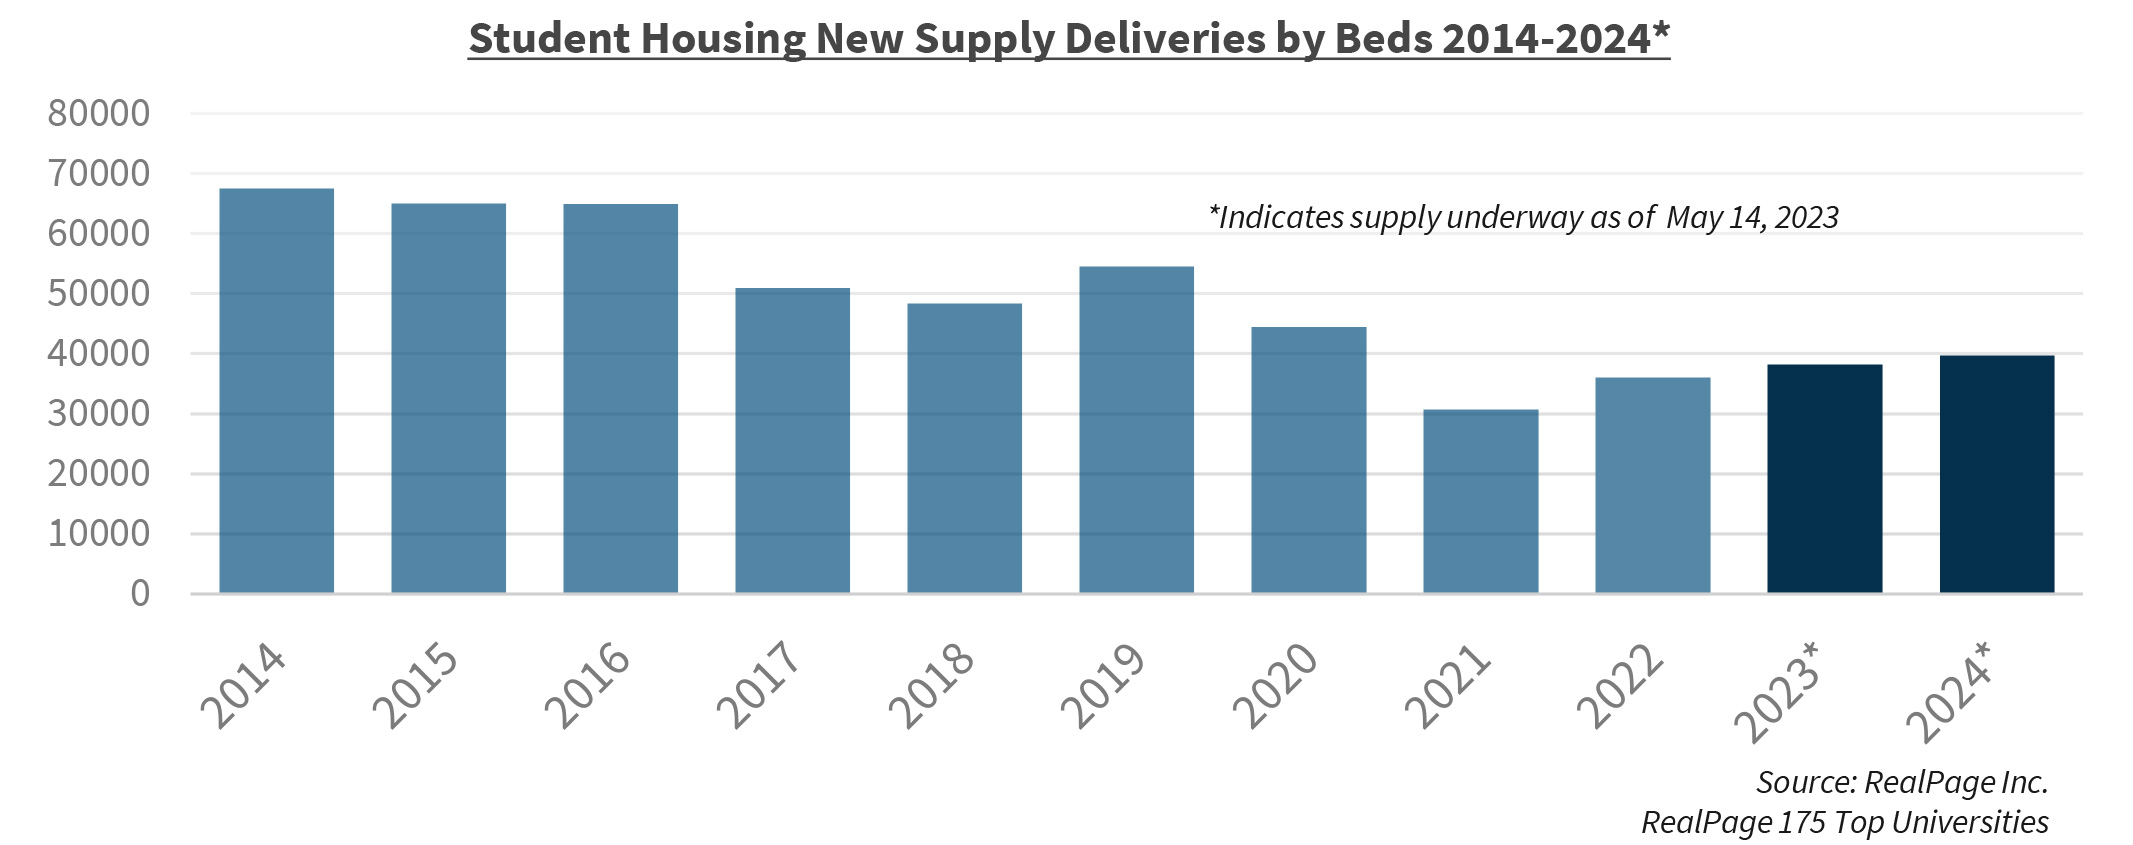 Student Housing New Supply Deliveries by Beds 2014-2024